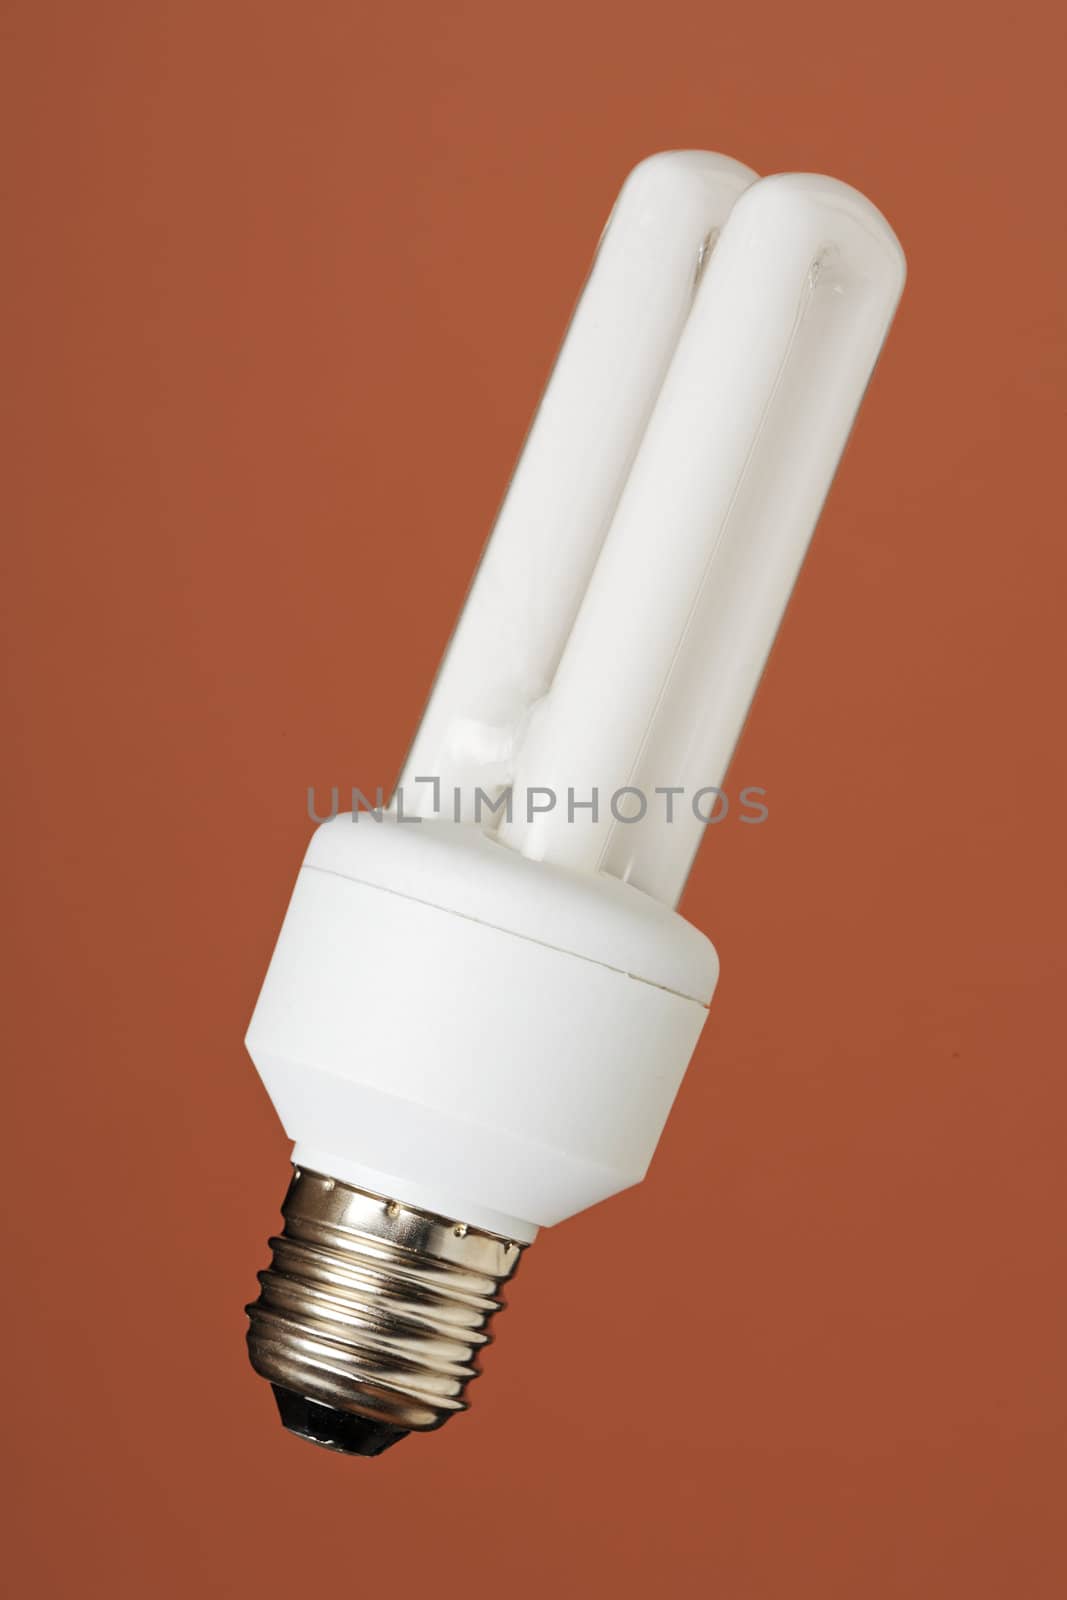 Energy saving compact fluorescent bulb on brown background